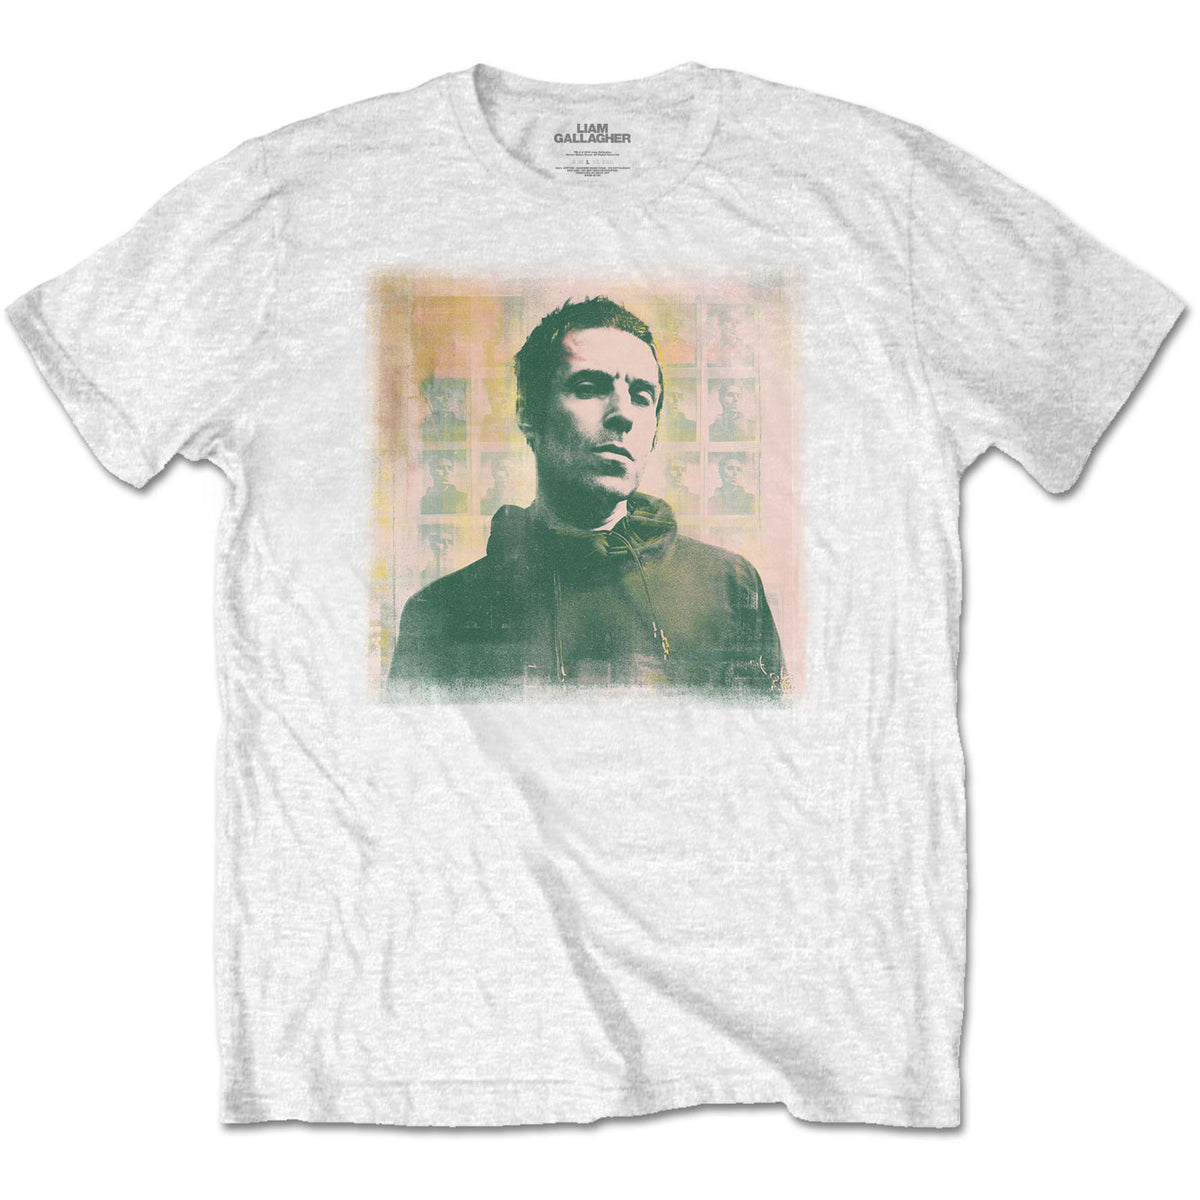 Liam Gallagher Adult T-Shirt - Monochrome - White Official Licensed Design - Worldwide Shipping